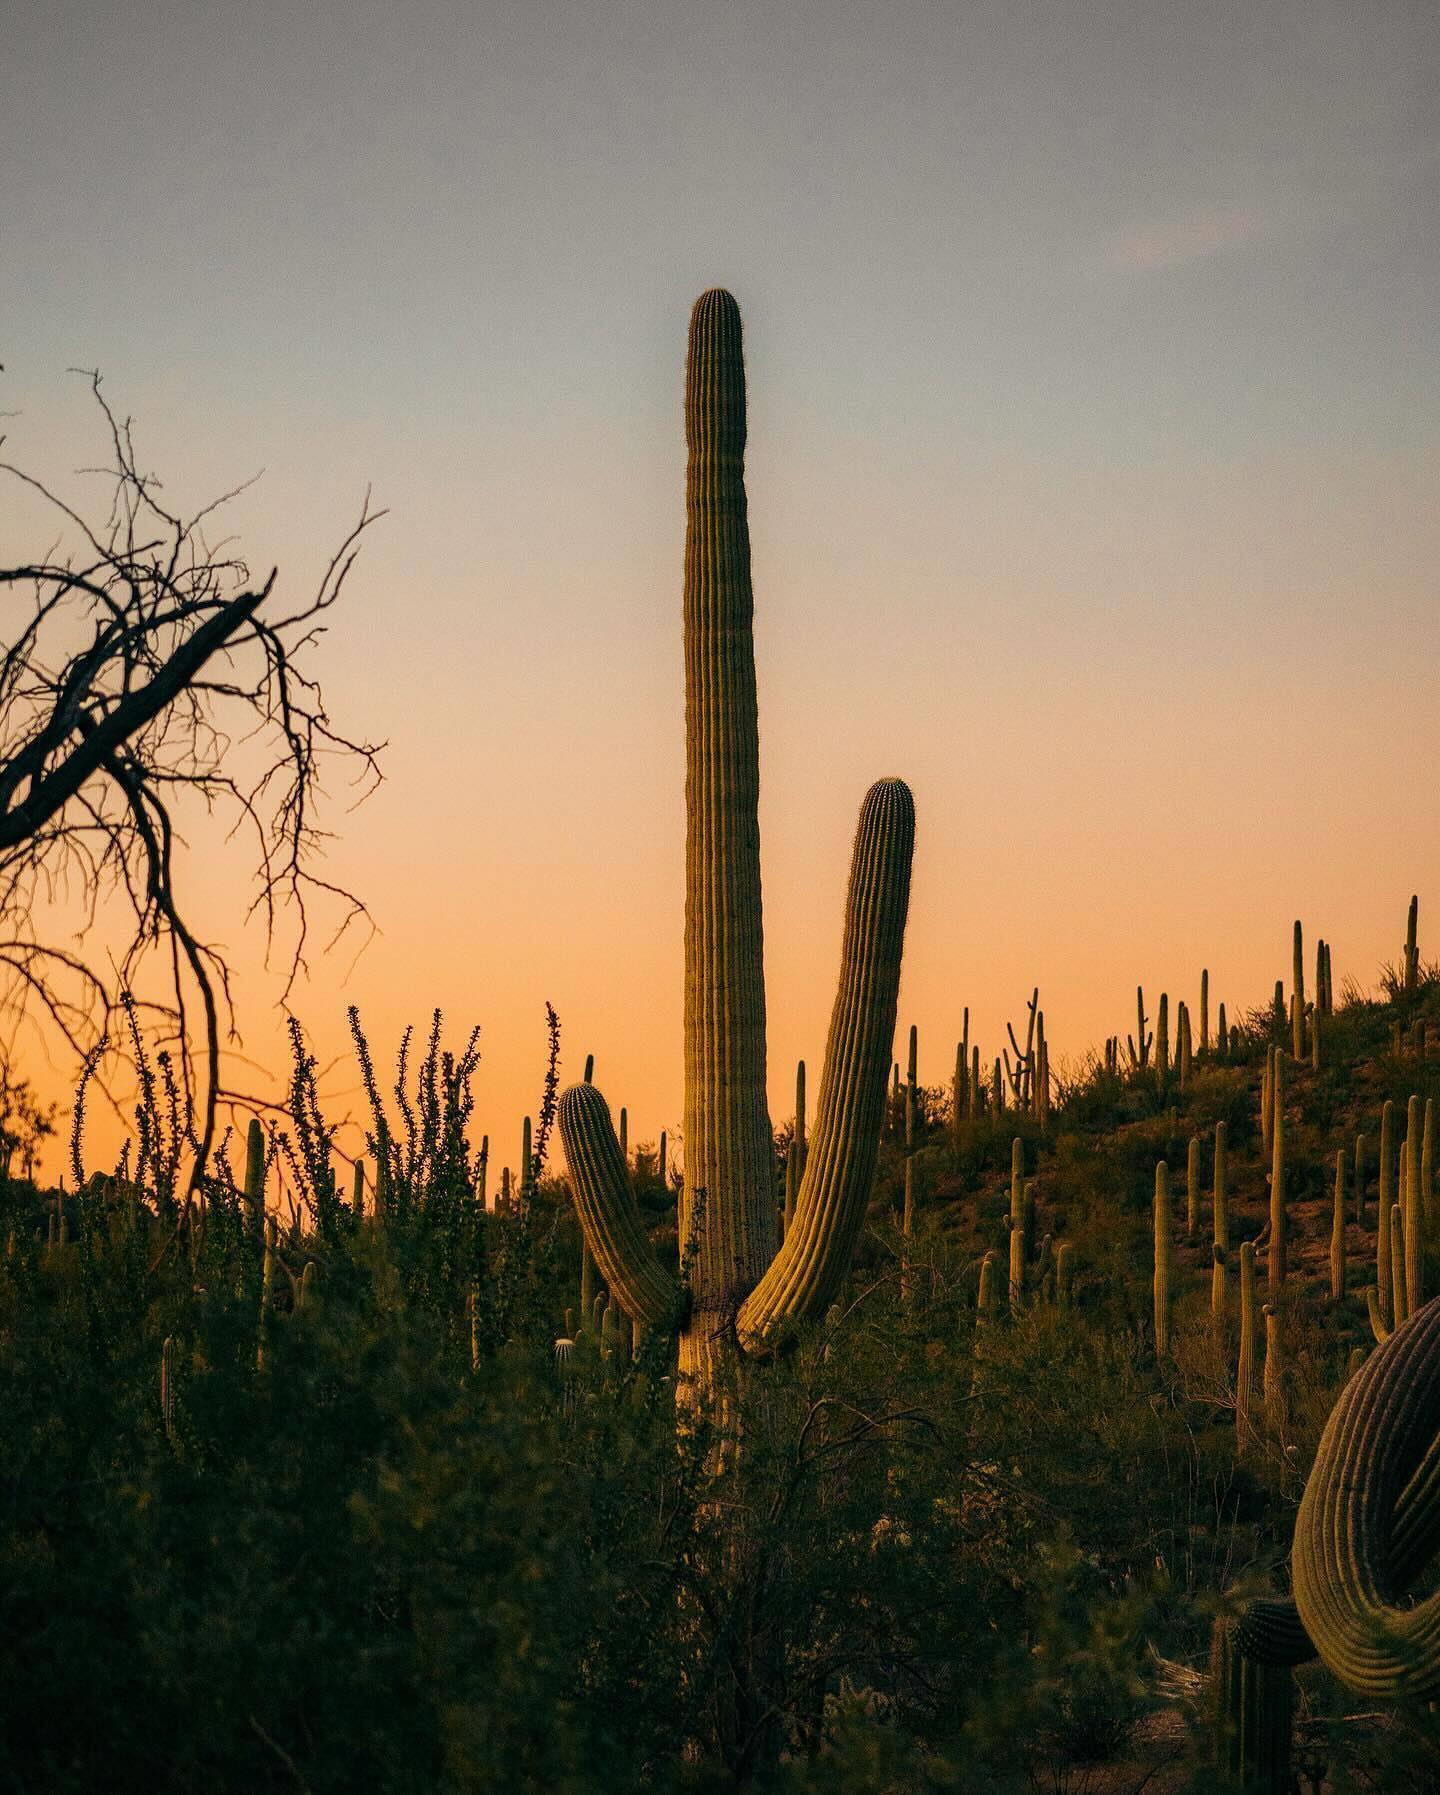 Saguaros are the largest cactus in the United States. Th...